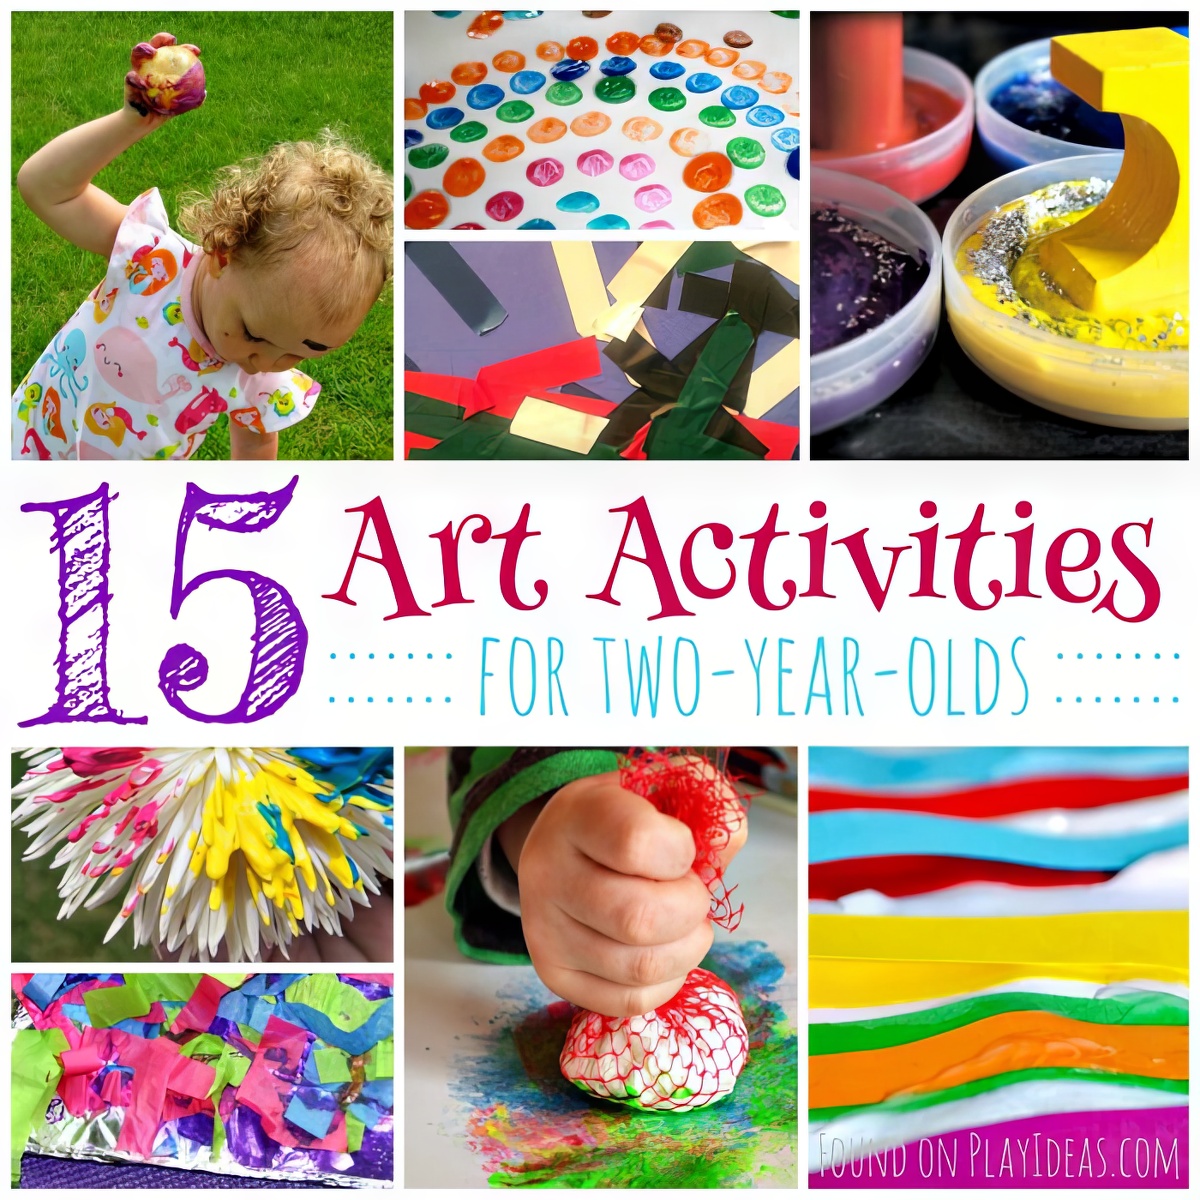 Art Ideas for Two Year Olds Blog, fun art activities for 2-year-olds, toddler fun arts and crafts